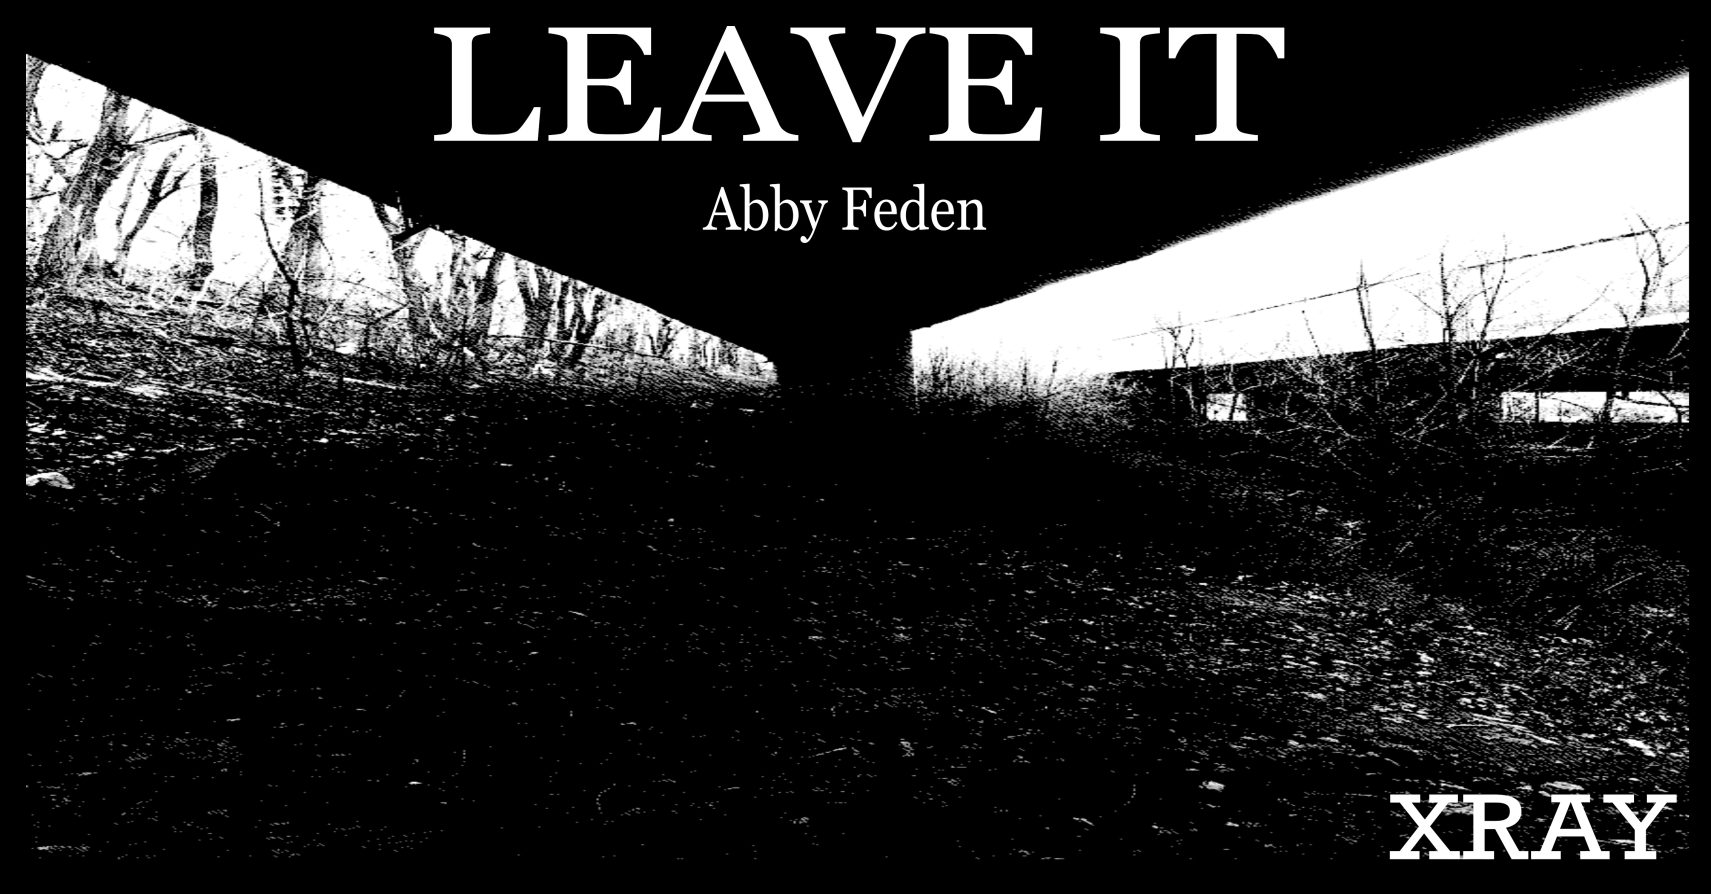 LEAVE IT by Abby Feden